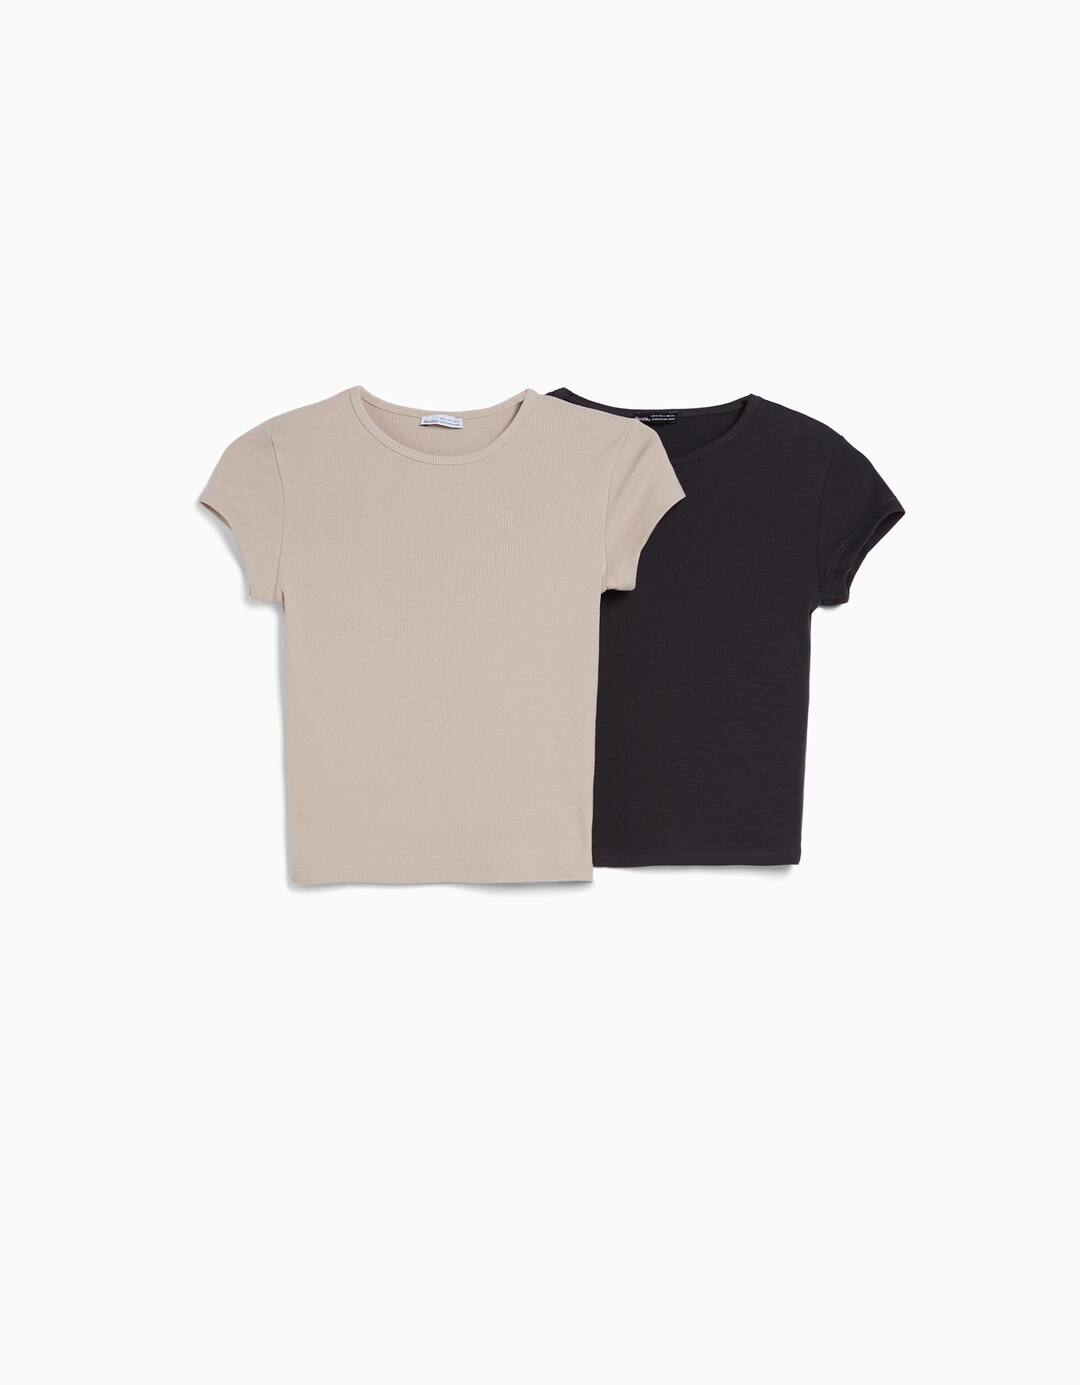 Pack of 2 short sleeve ribbed T-shirts.